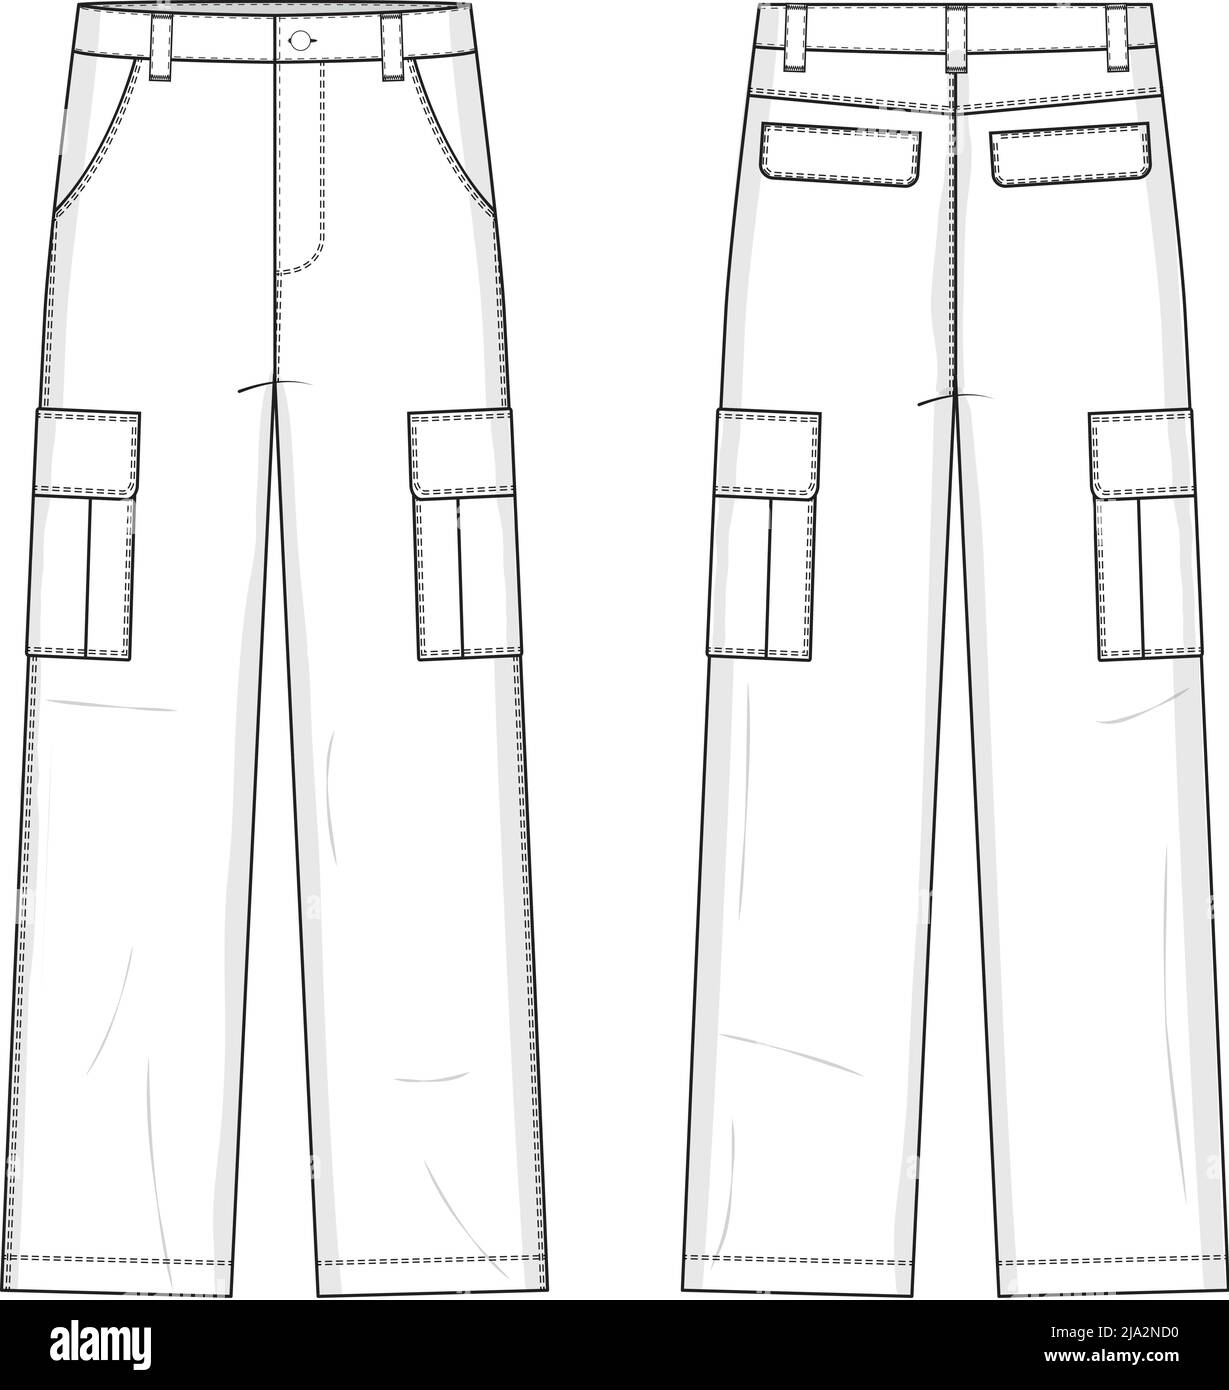 Straight Leg Cargo Pants Flat Technical Drawing Illustration Five Pocket Classic Blank Streetwear Mock-up Template for Design and Tech Packs CAD Stock Vector